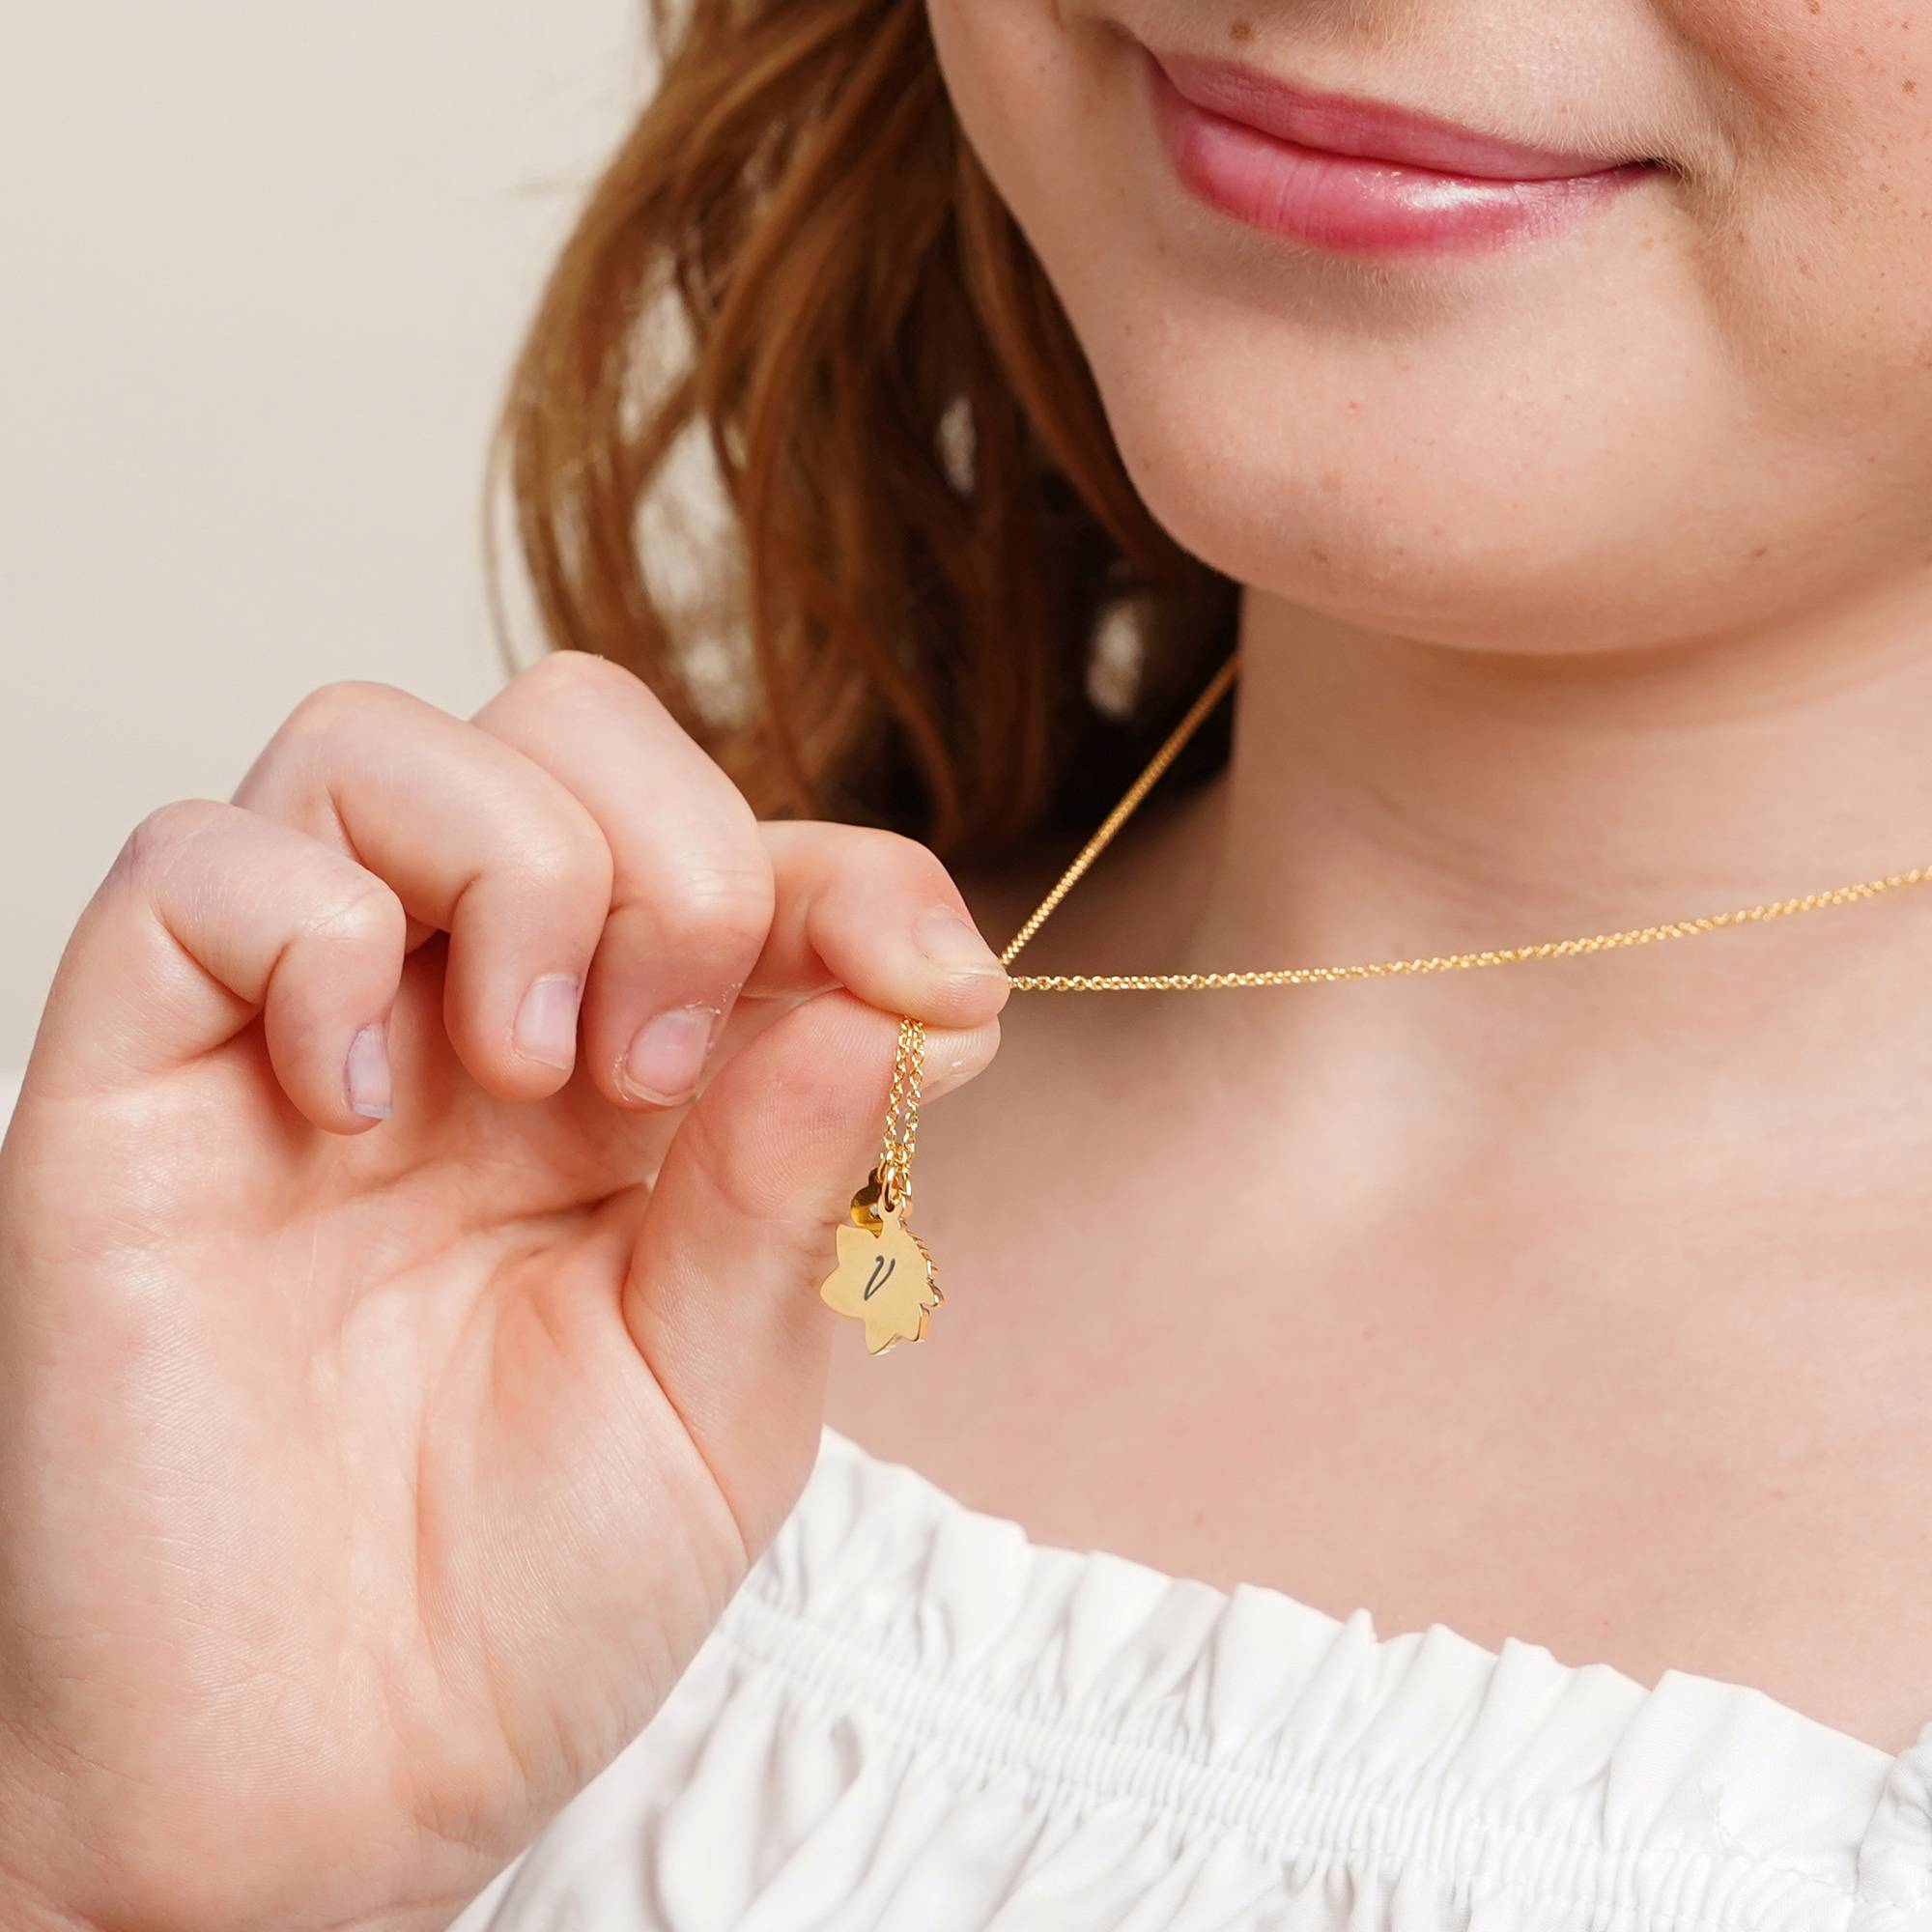 Blooming Initial Birth Flower and Stone Pendant Necklace in 18K Gold Vermeil-4 product photo